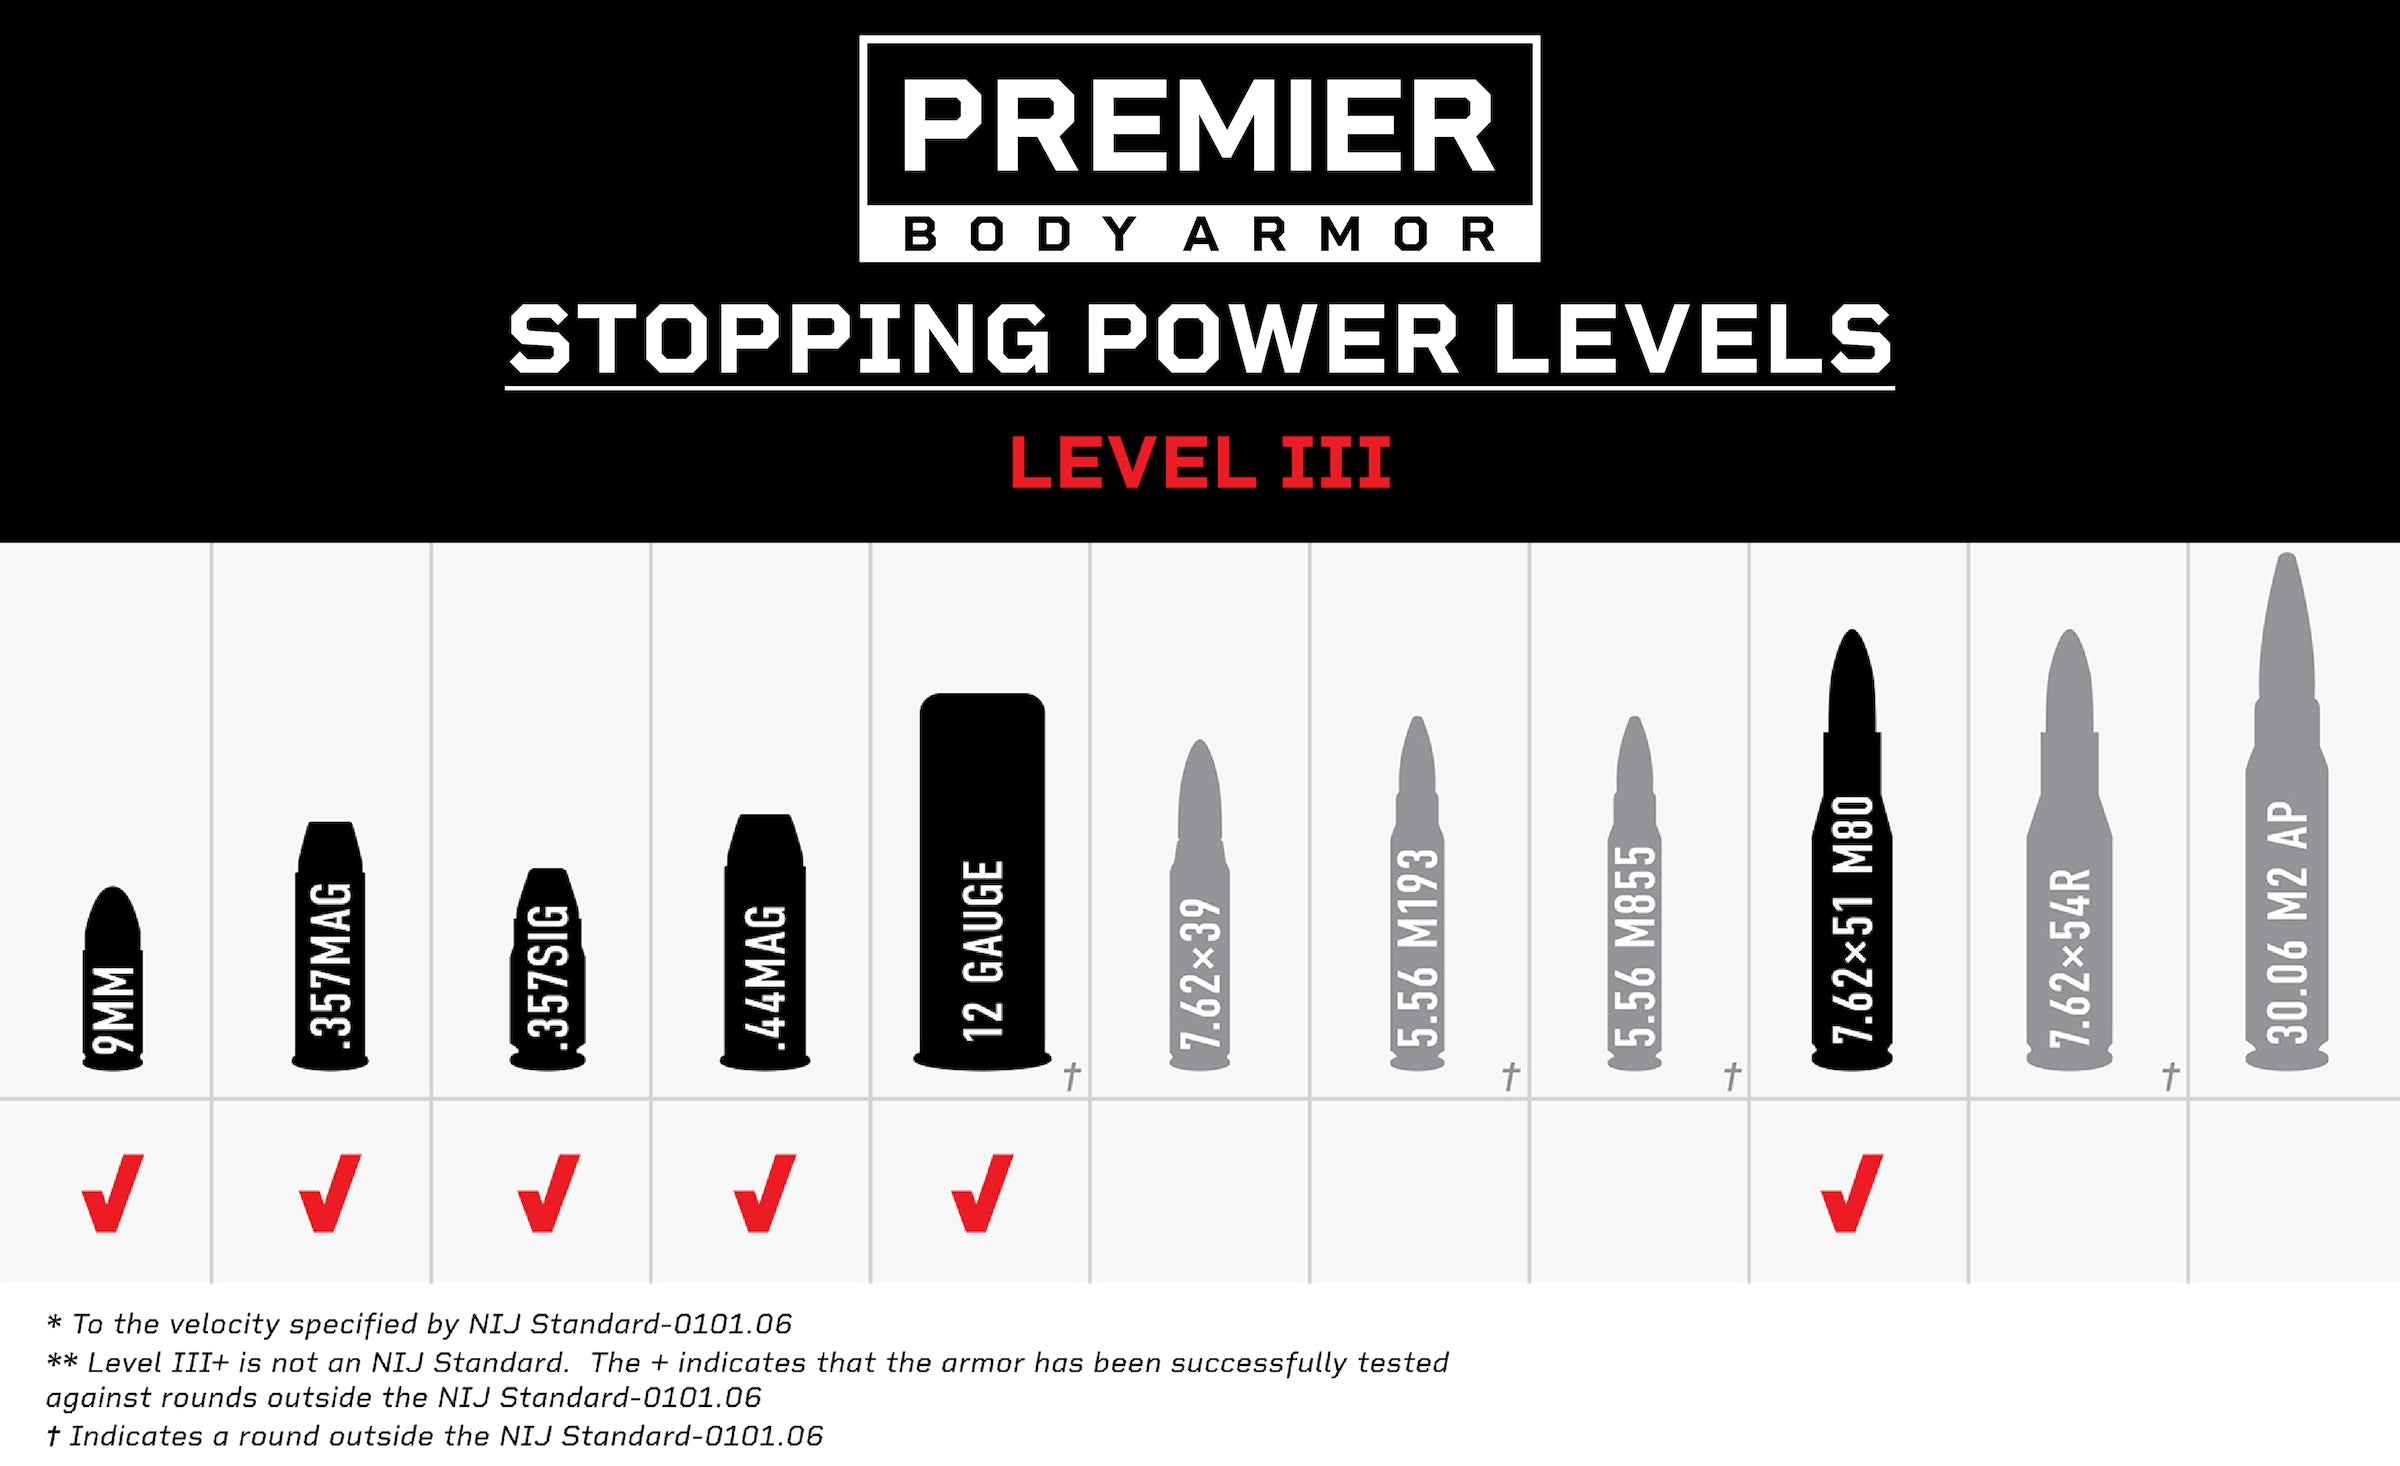 level 3 body armor protects against handguns, shotguns, and some rifle rounds